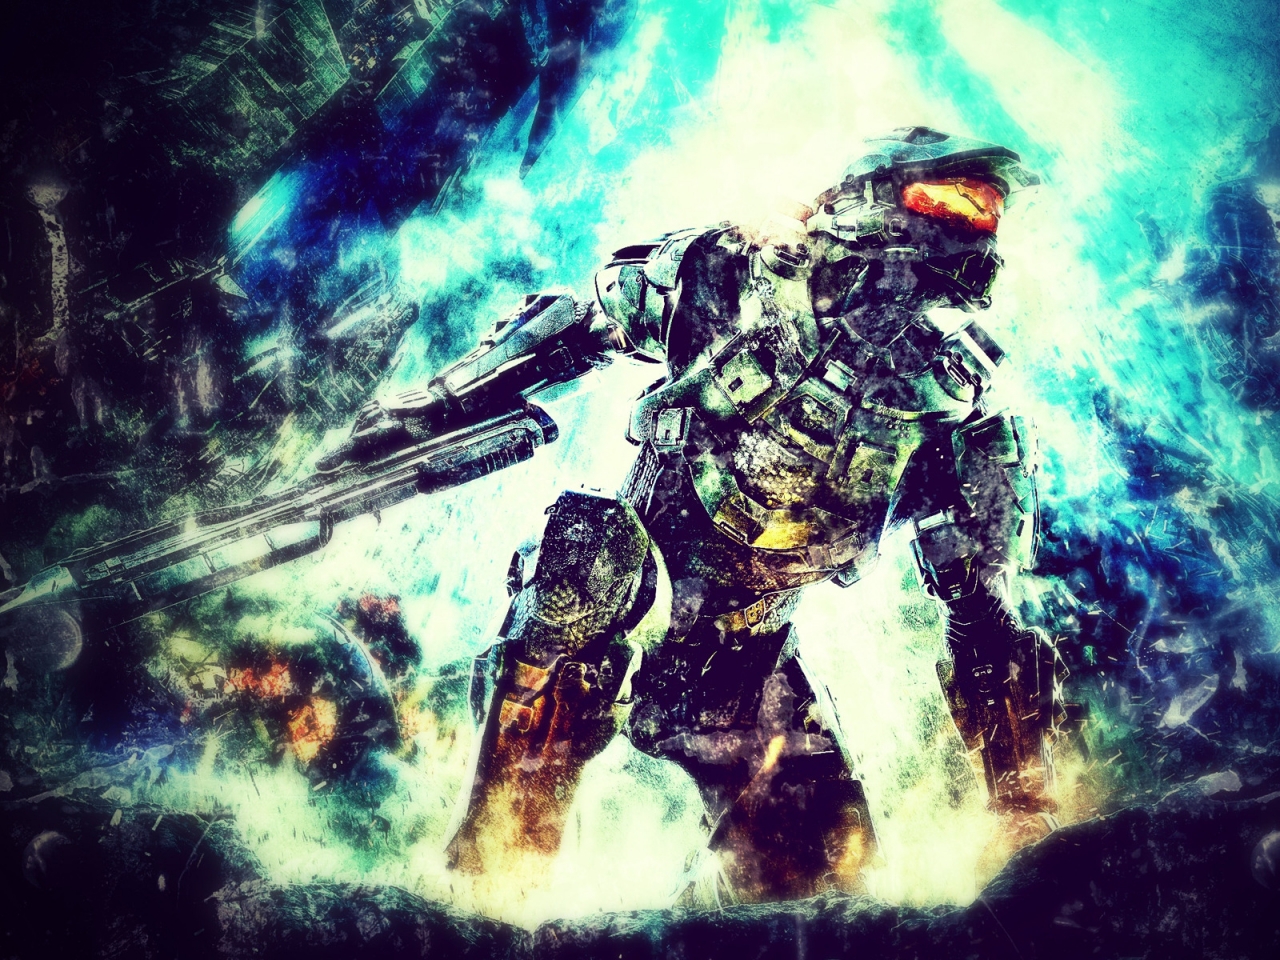 Halo 4 for 1280 x 960 resolution